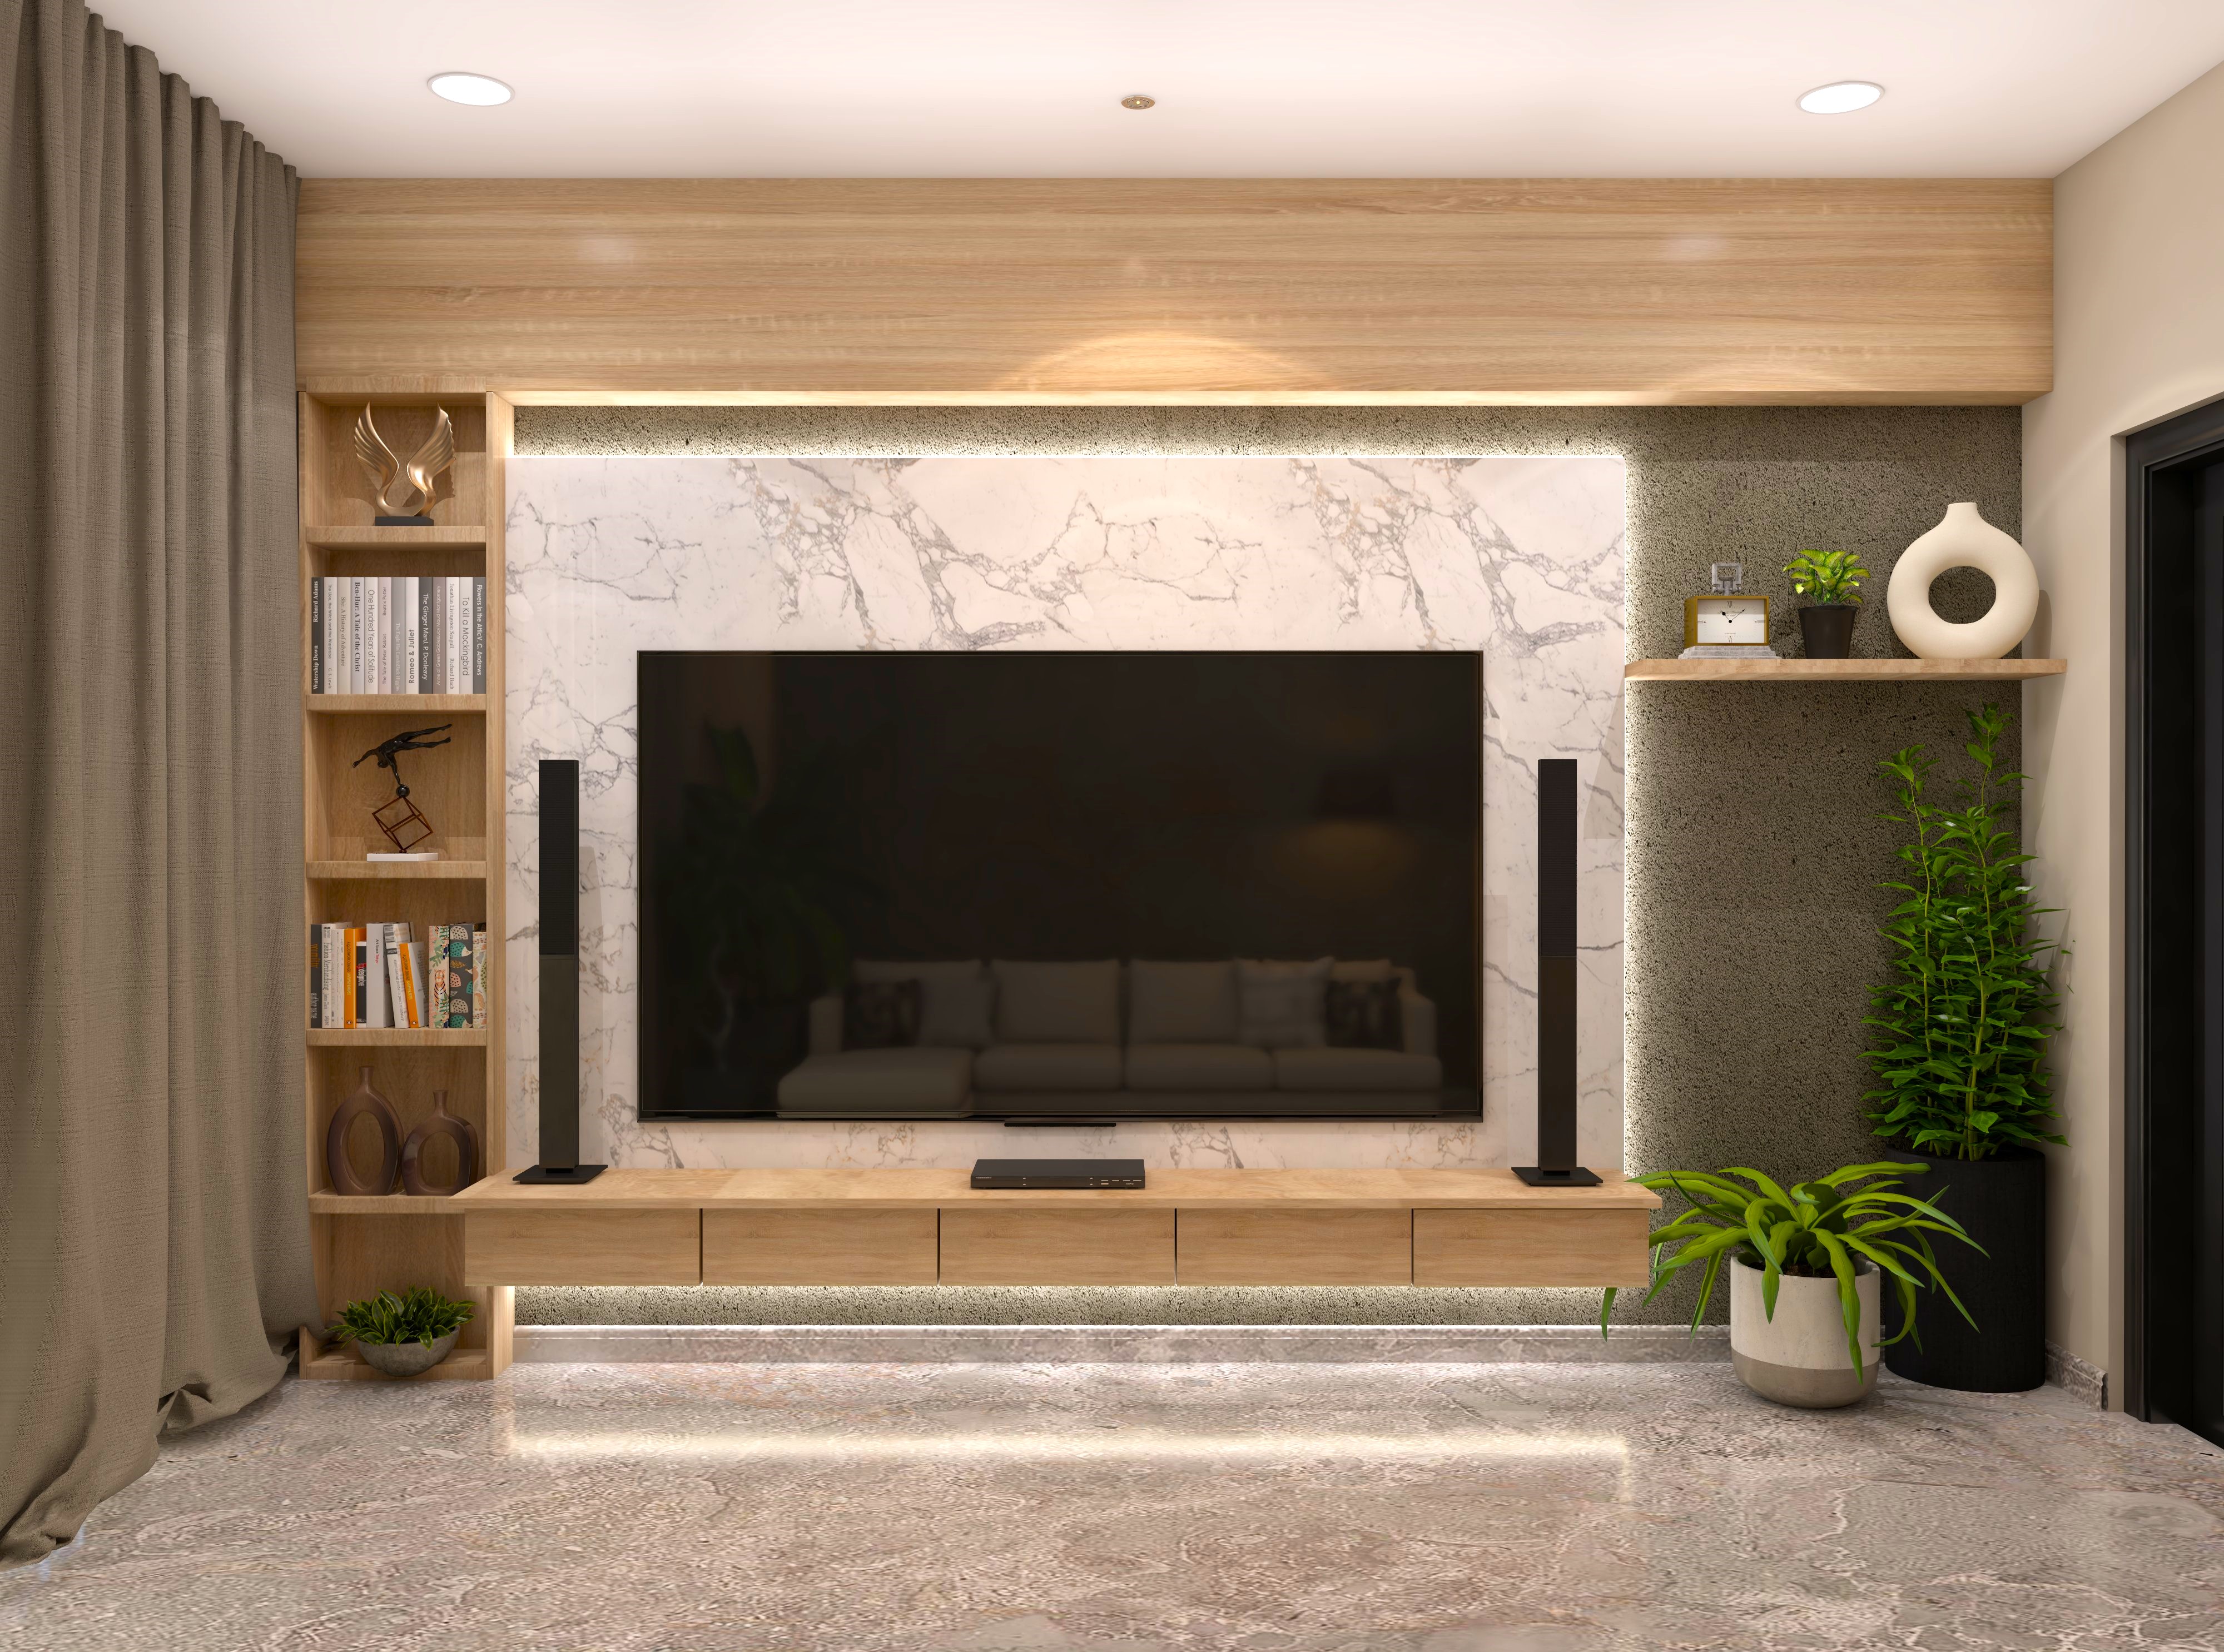 TV unit wall design with white marble and wooden shelves and drawers-Beautiful Homes